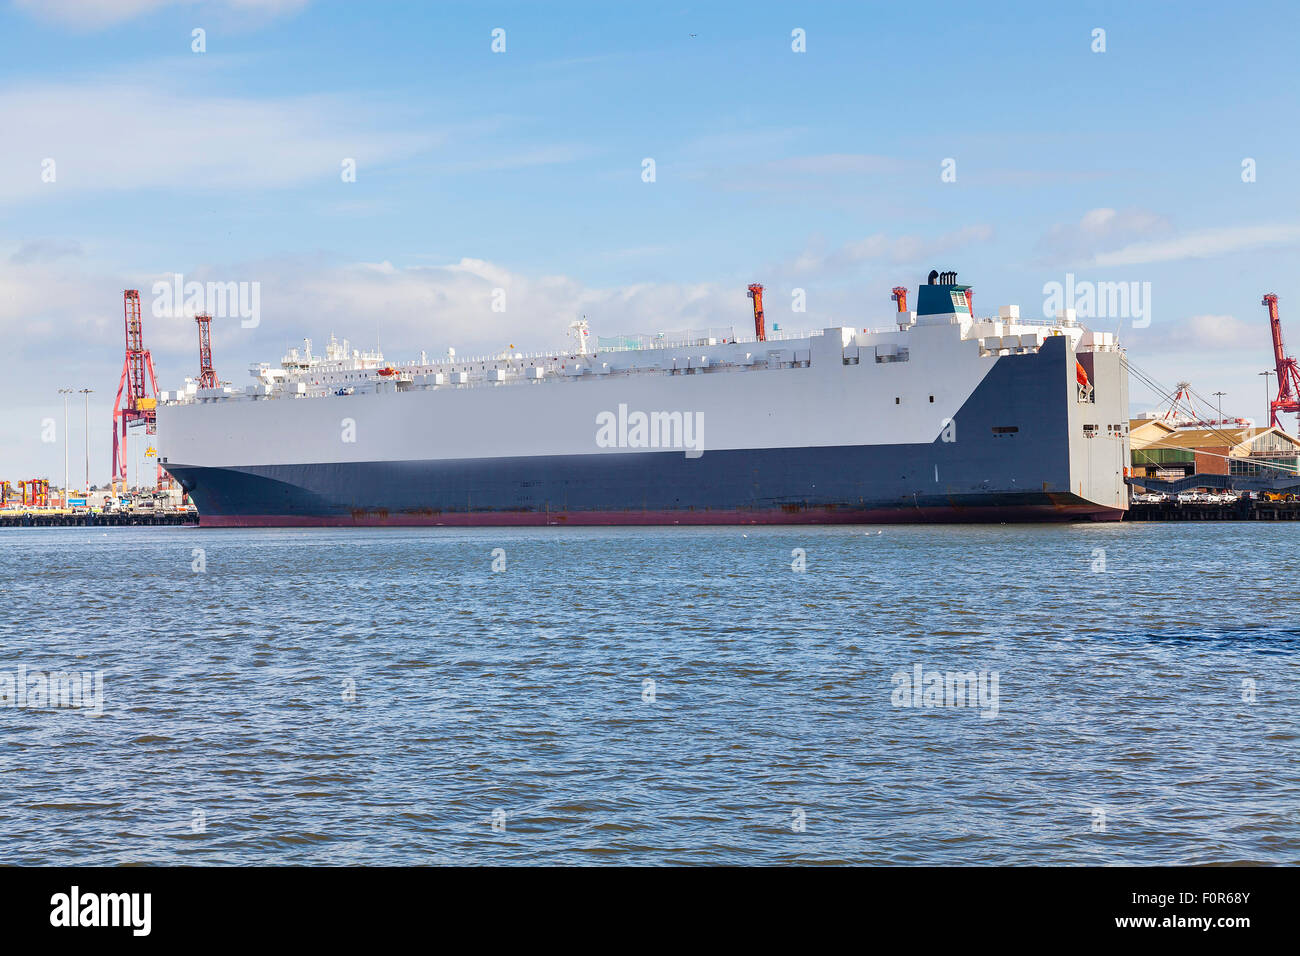 Car carrier at a port Stock Photo